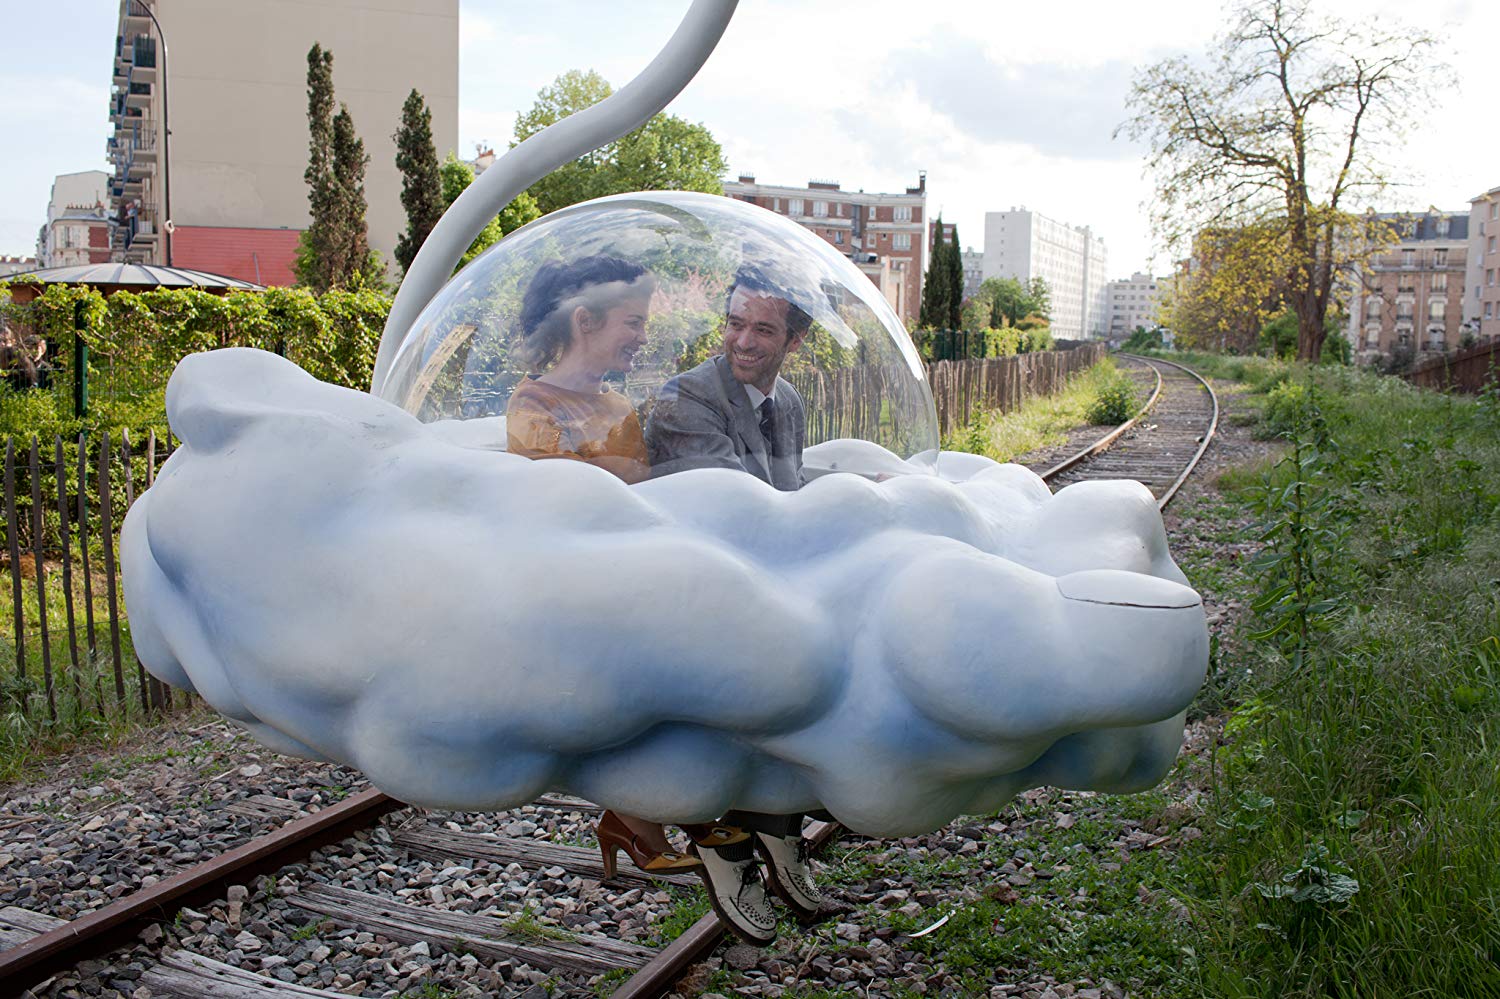 Audrey Tautou and Romain Duris go on a date flown across Paris in a bubble car in Mood Indigo (2013)